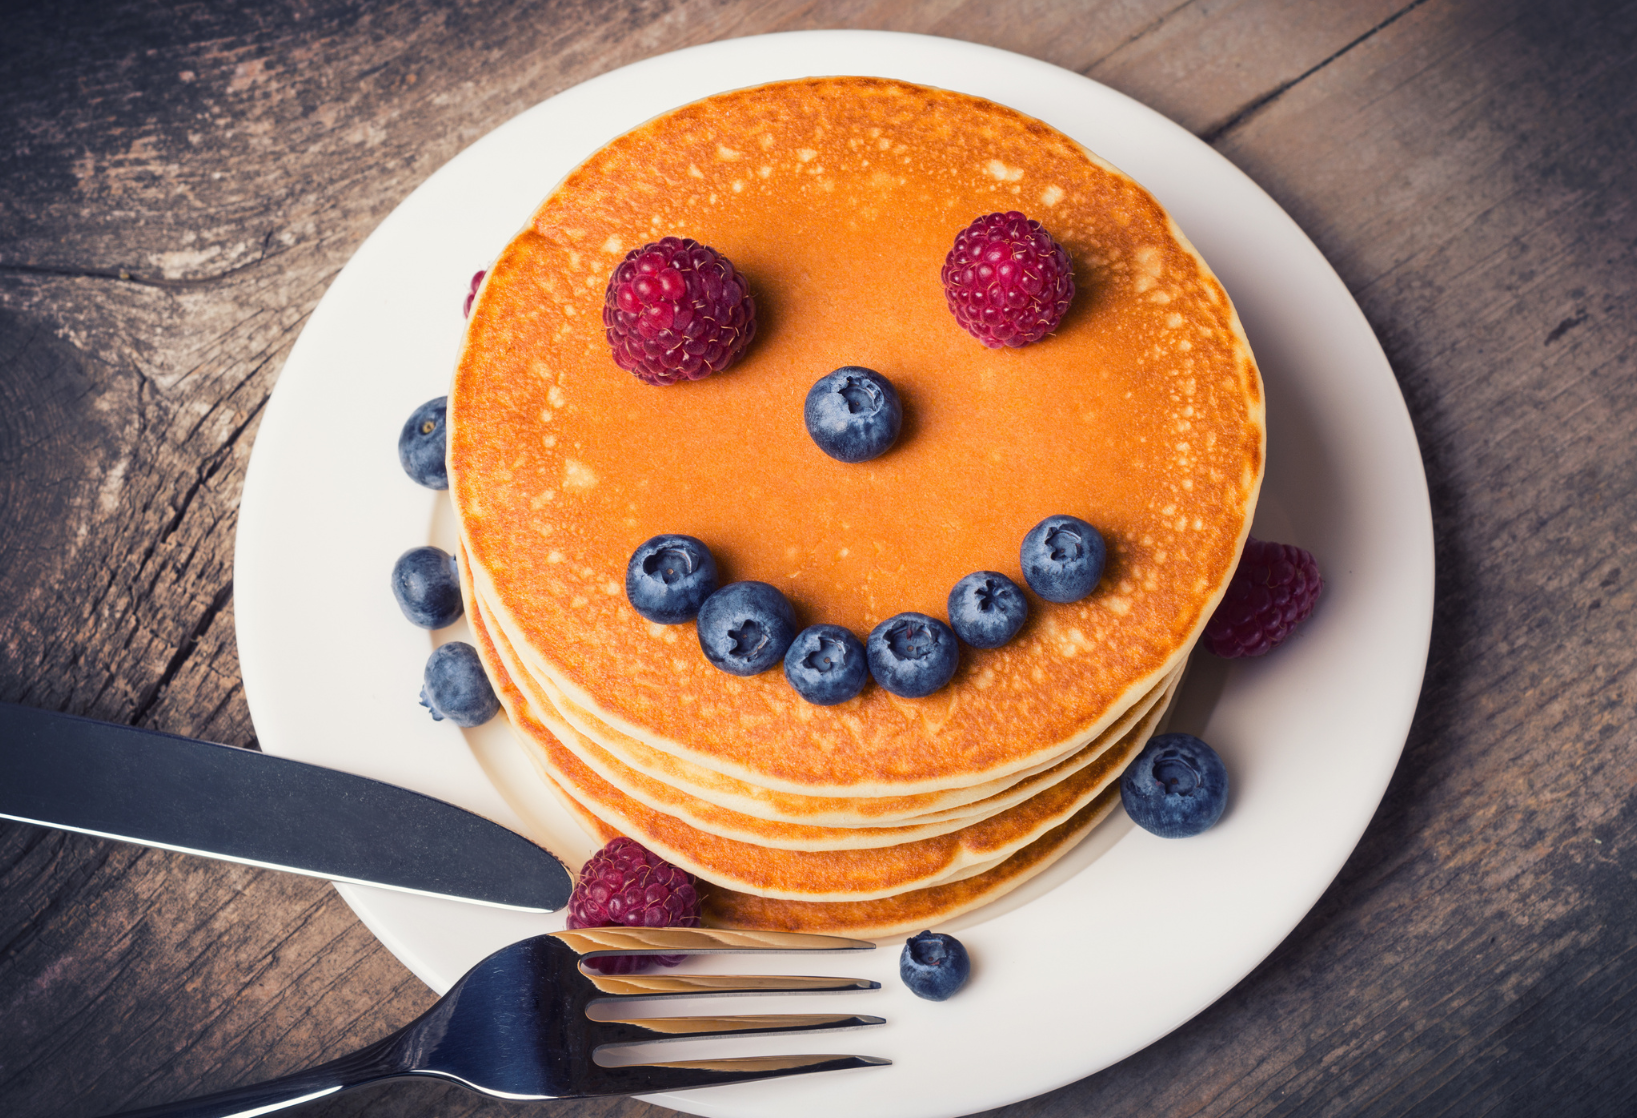 Stack of pancakes with a face made of fruit.